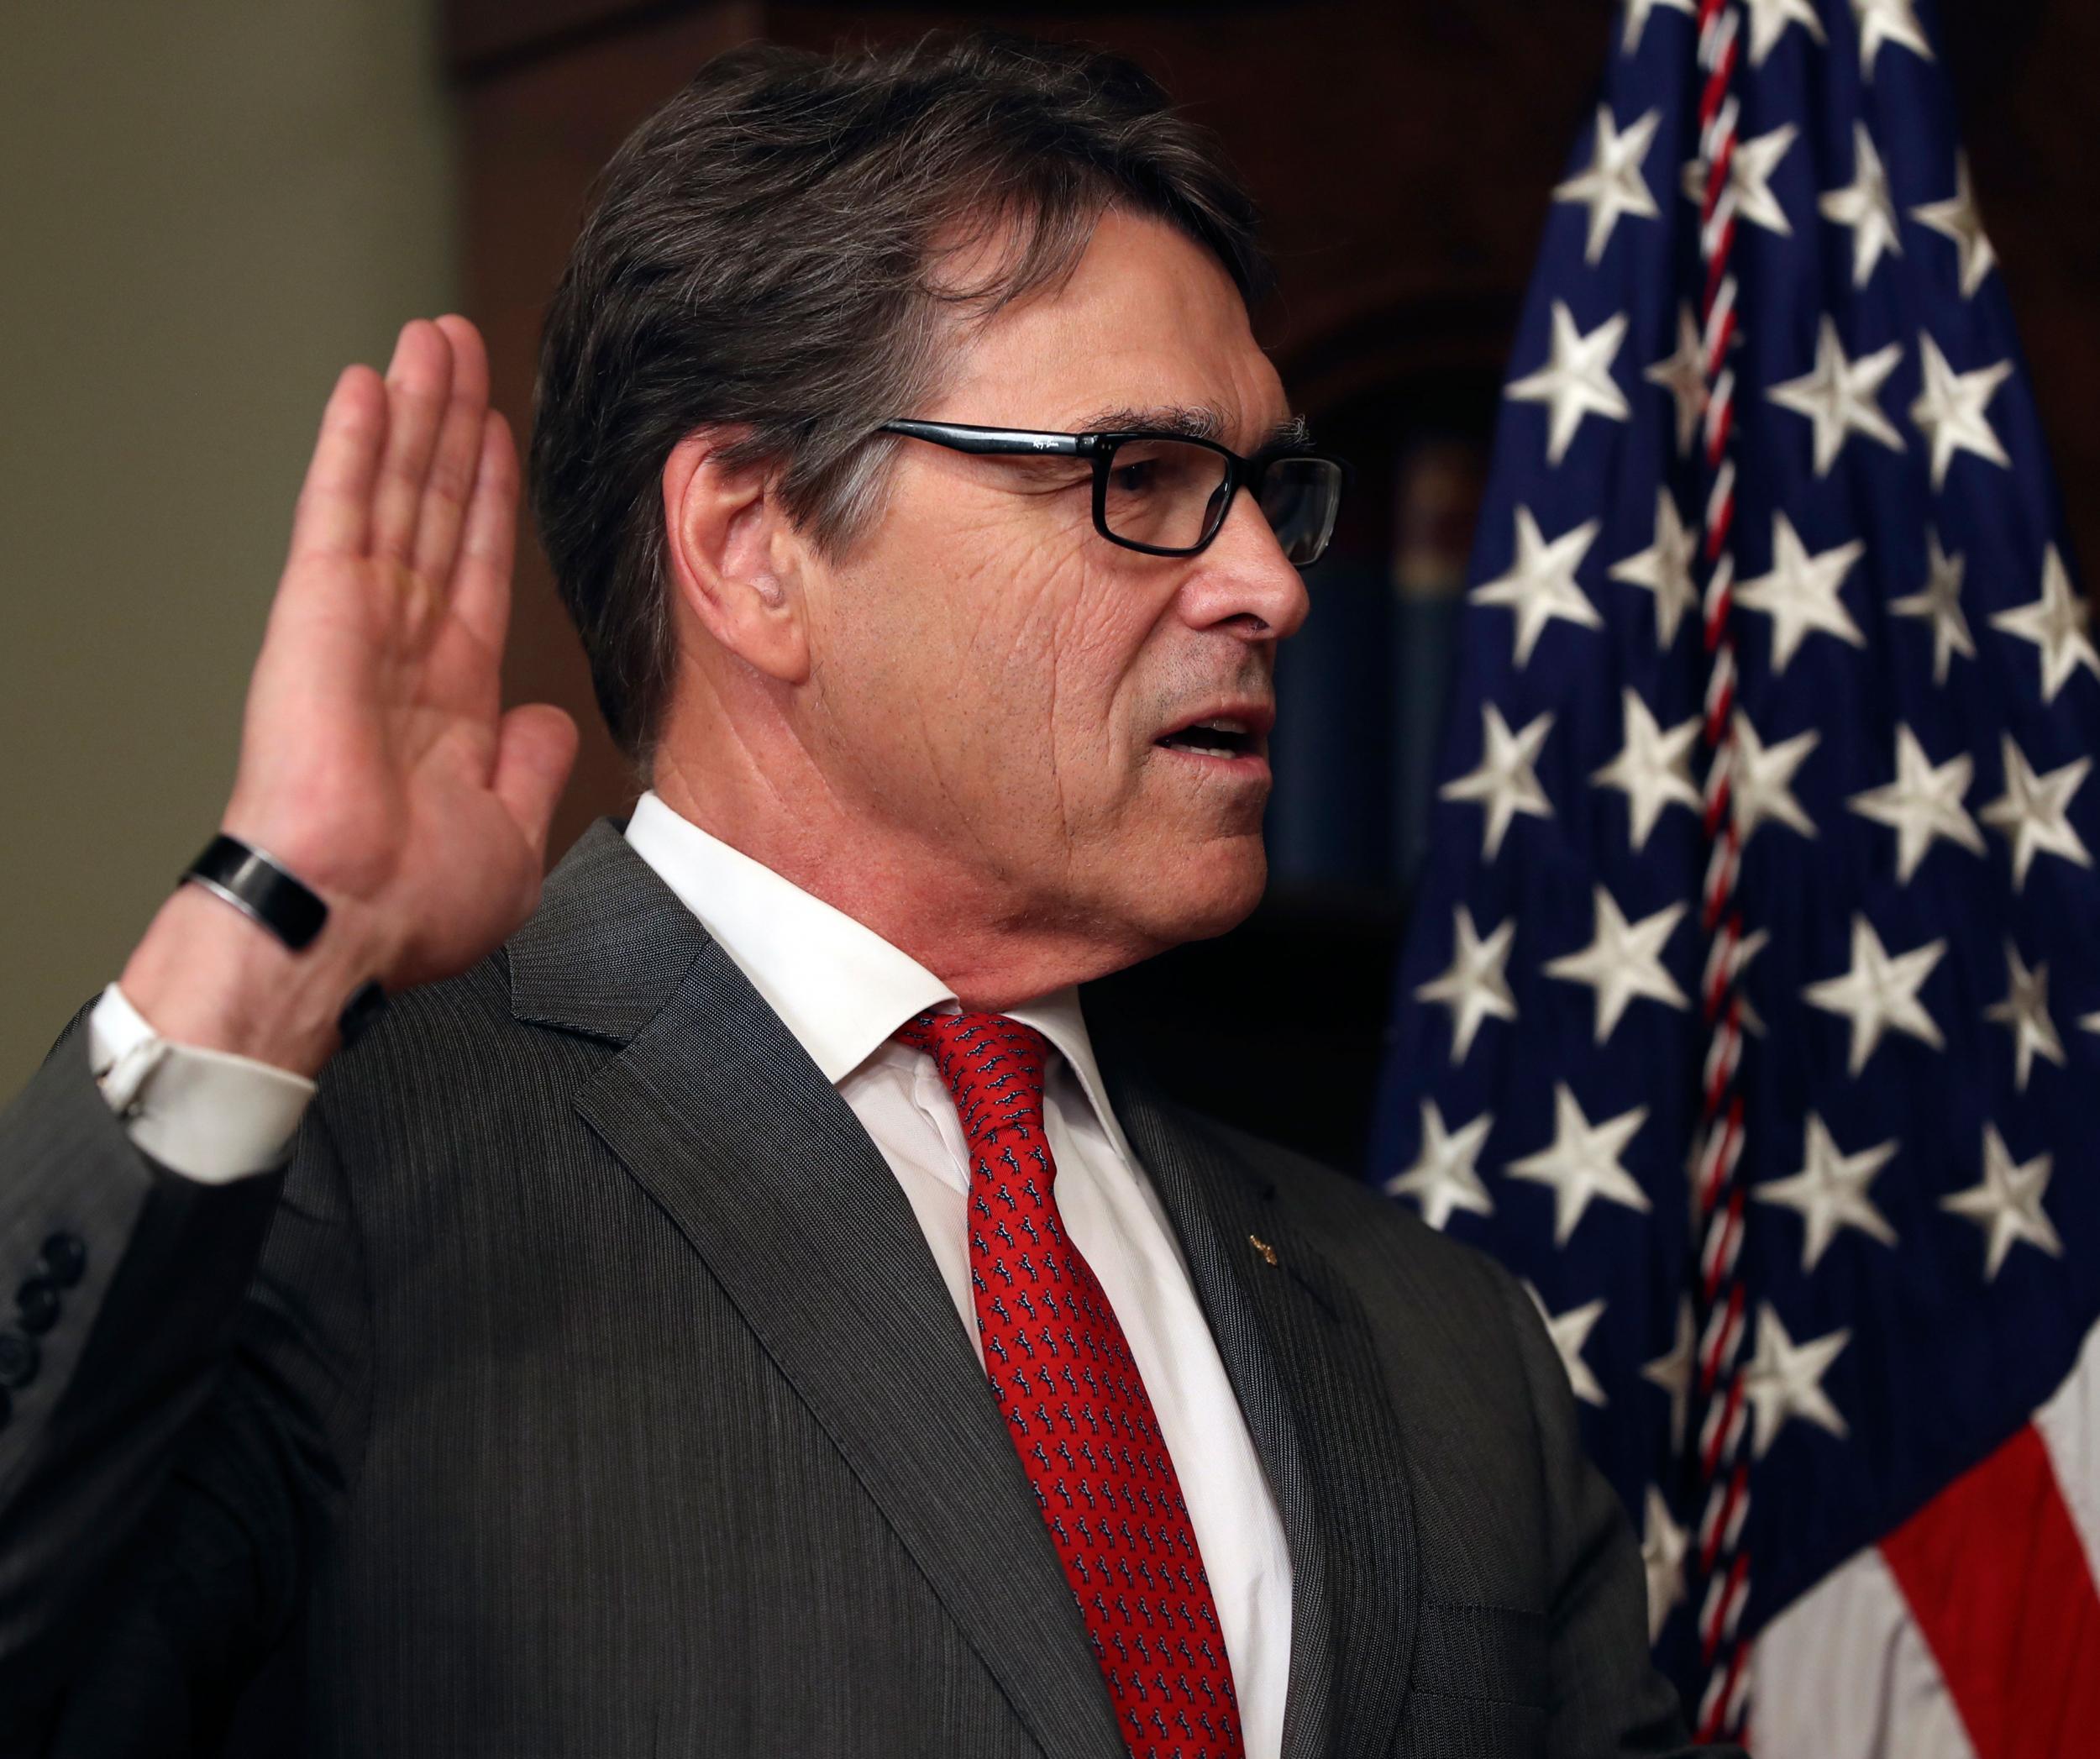 Energy Secretary Rick Perry at the White House during his swearing in ceremony